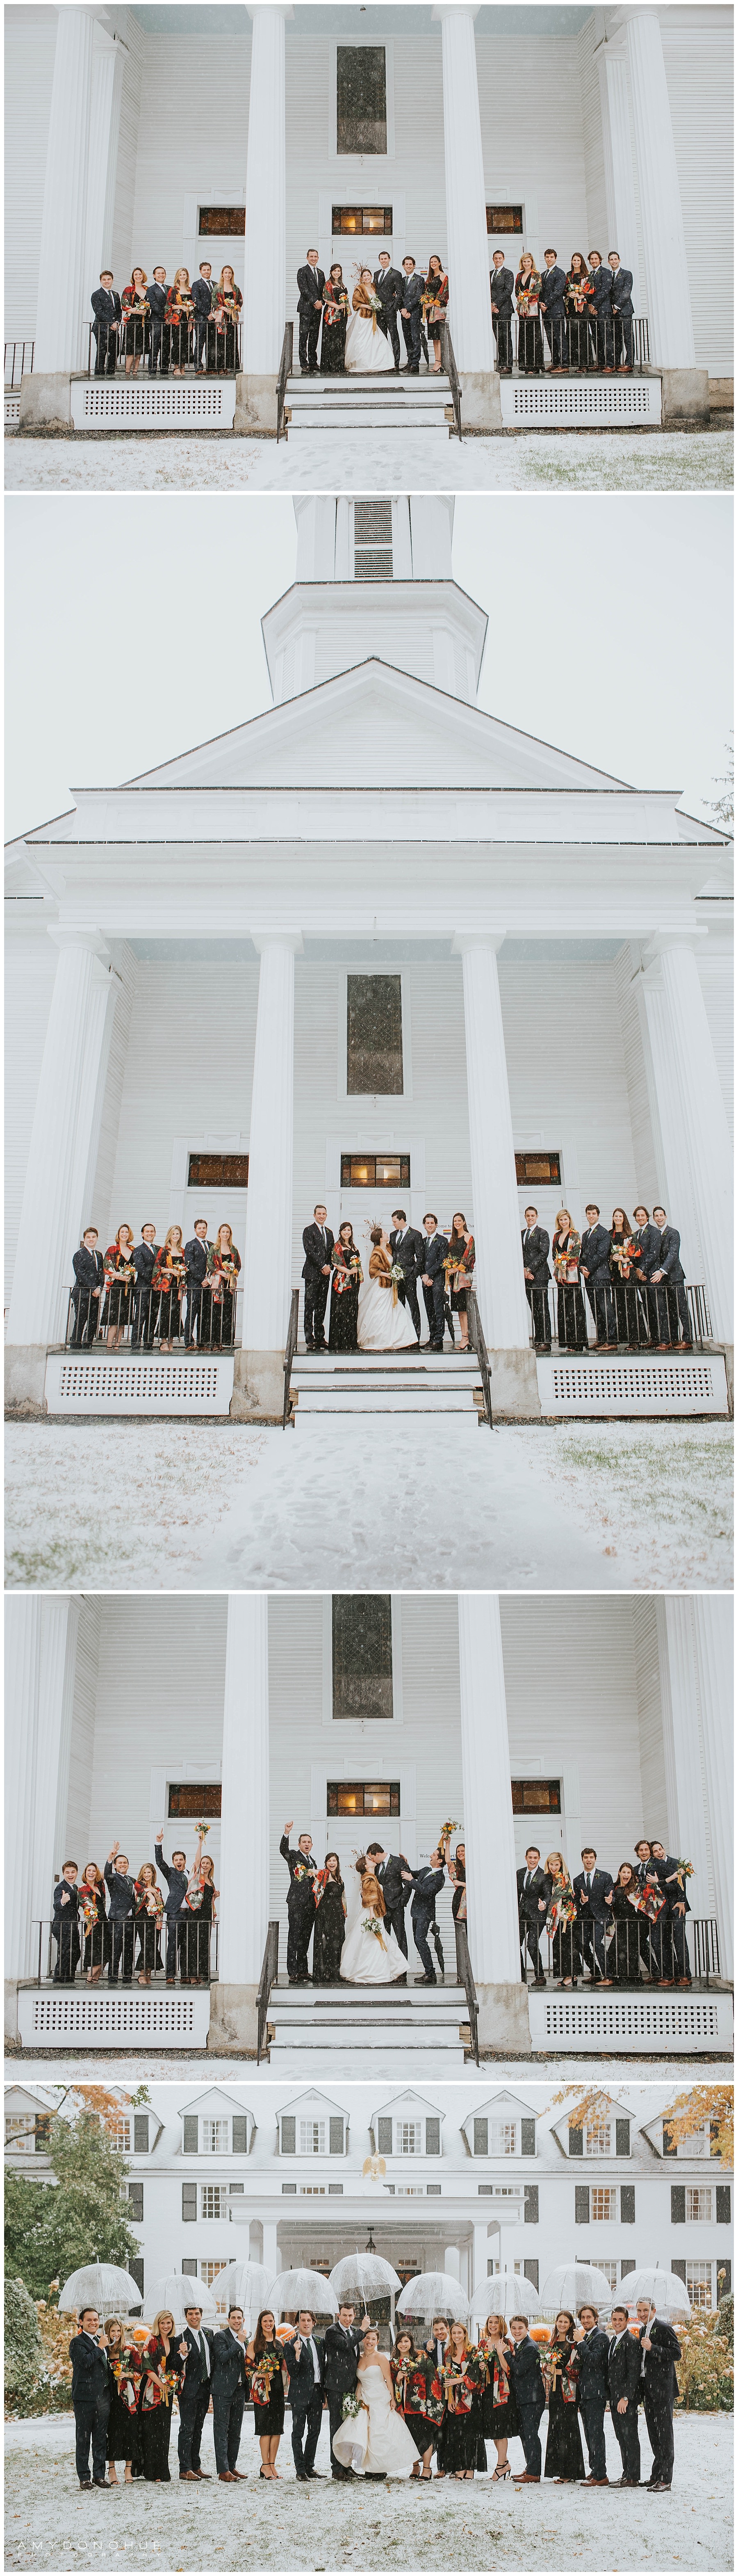 Bridal Party Portraits | Woodstock, Vermont Wedding Photographer | © Amy Donohue Photography